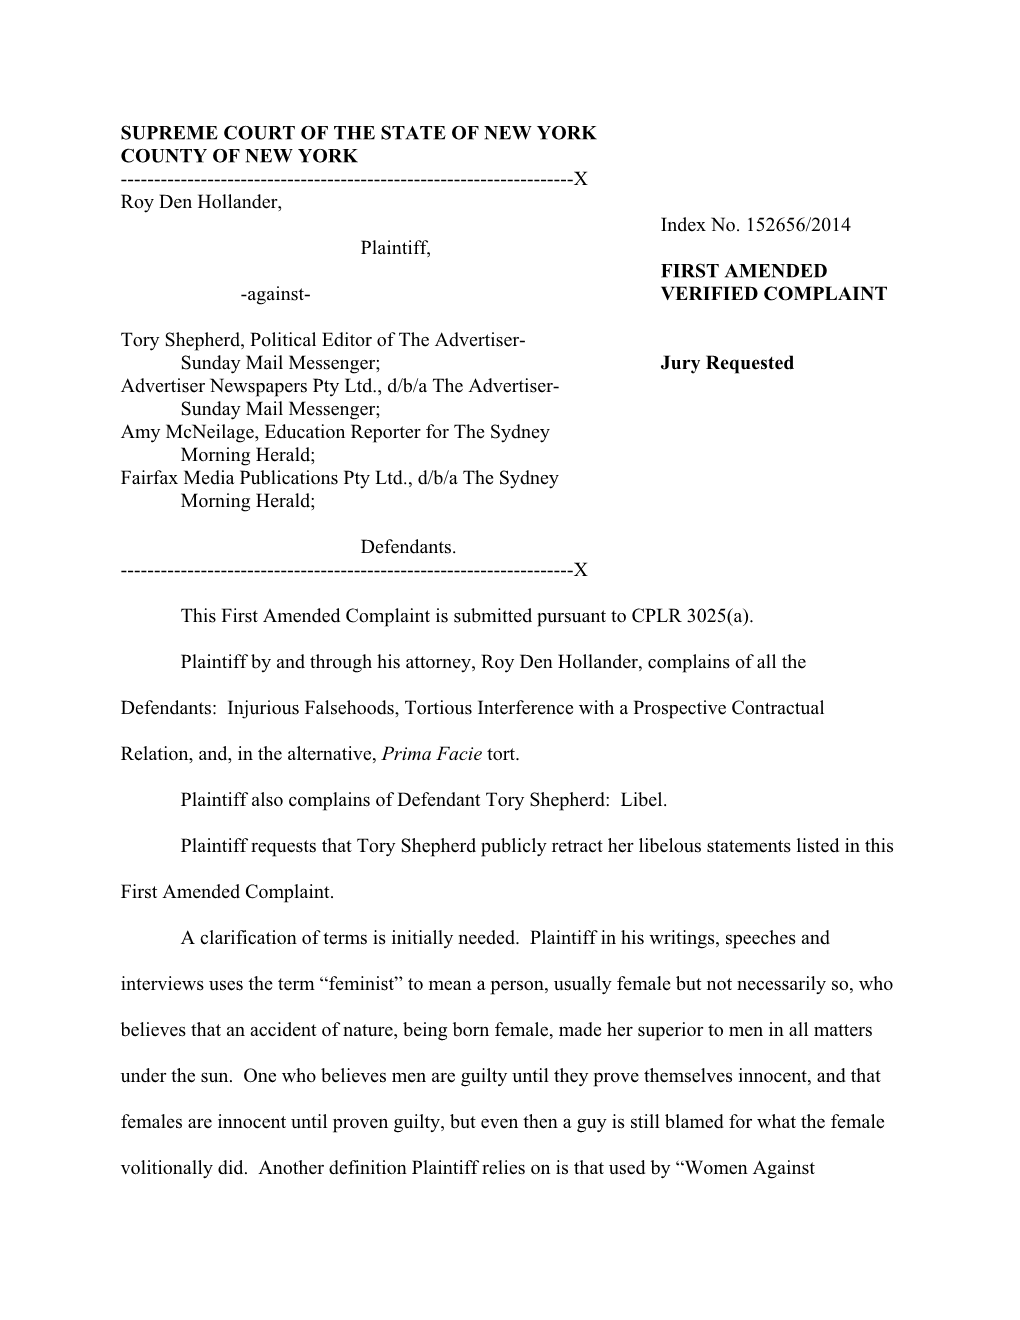 First Amended Complaint Is Submitted Pursuant to CPLR 3025(A)